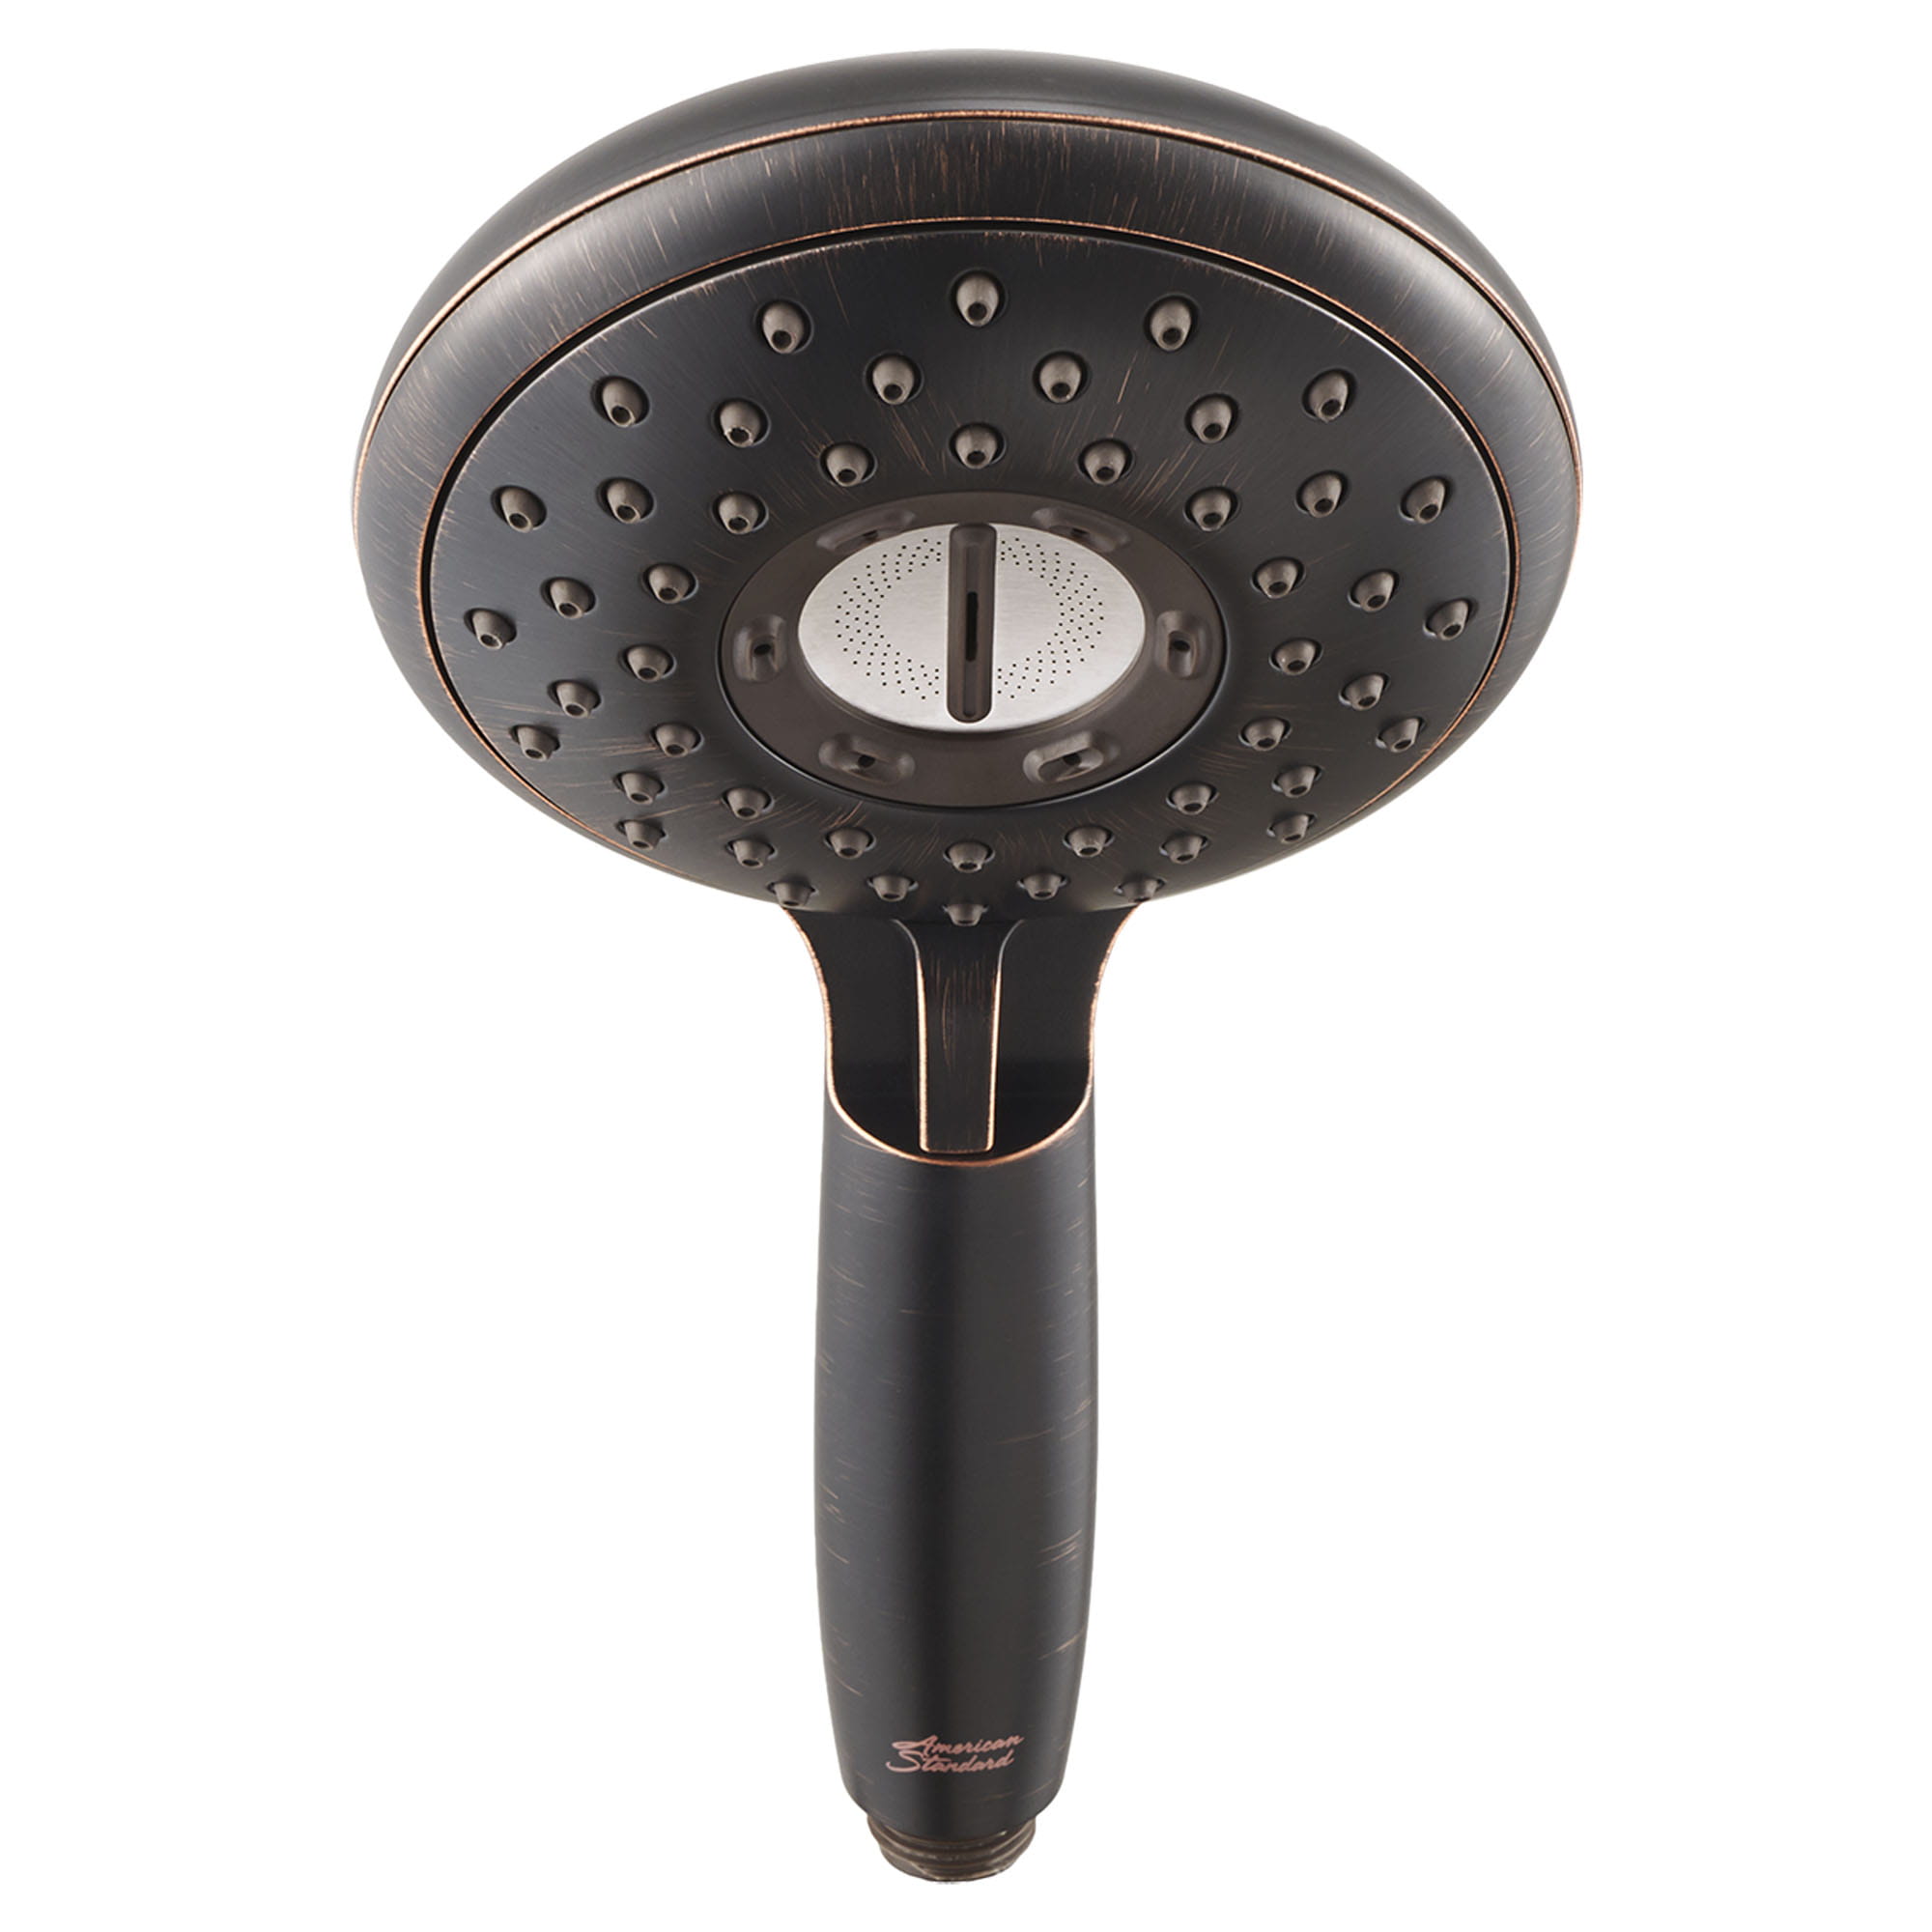 Spectra Handheld 18 gpm 68 L min 5 Inch 4 Function Hand Shower LEGACY BRONZE